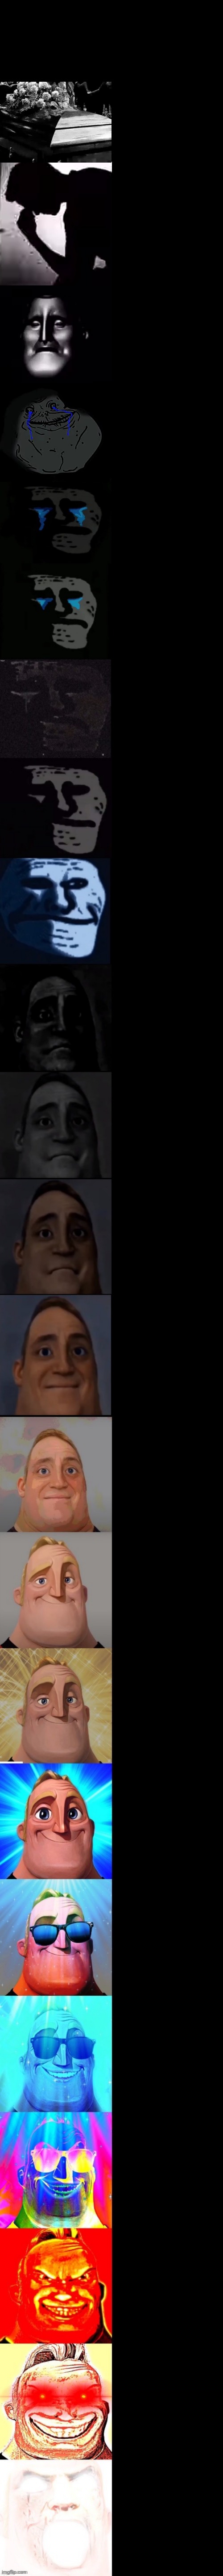 High Quality Mr. Incredible becoming sad to canny extended Blank Meme Template